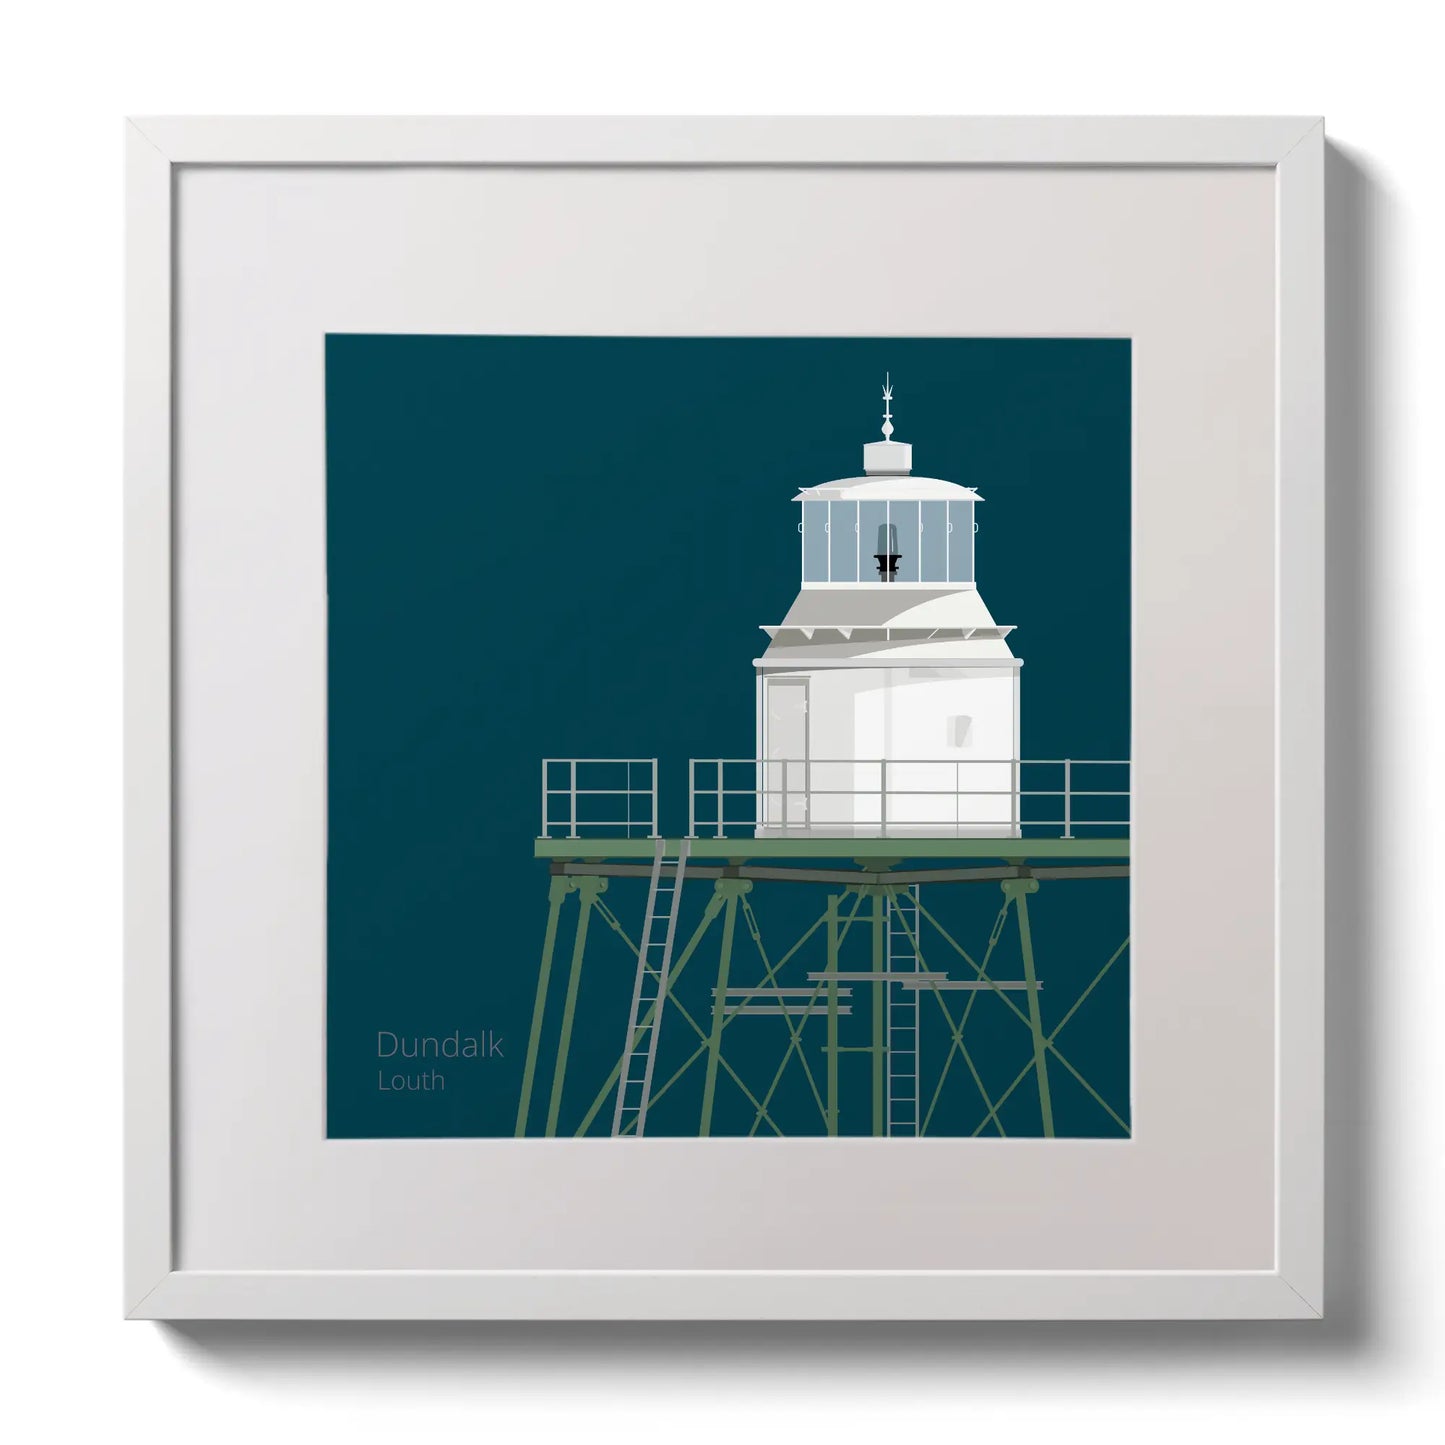 Illustration  Dundalk lighthouse on a midnight blue background,  in a white square frame measuring 30x30cm.